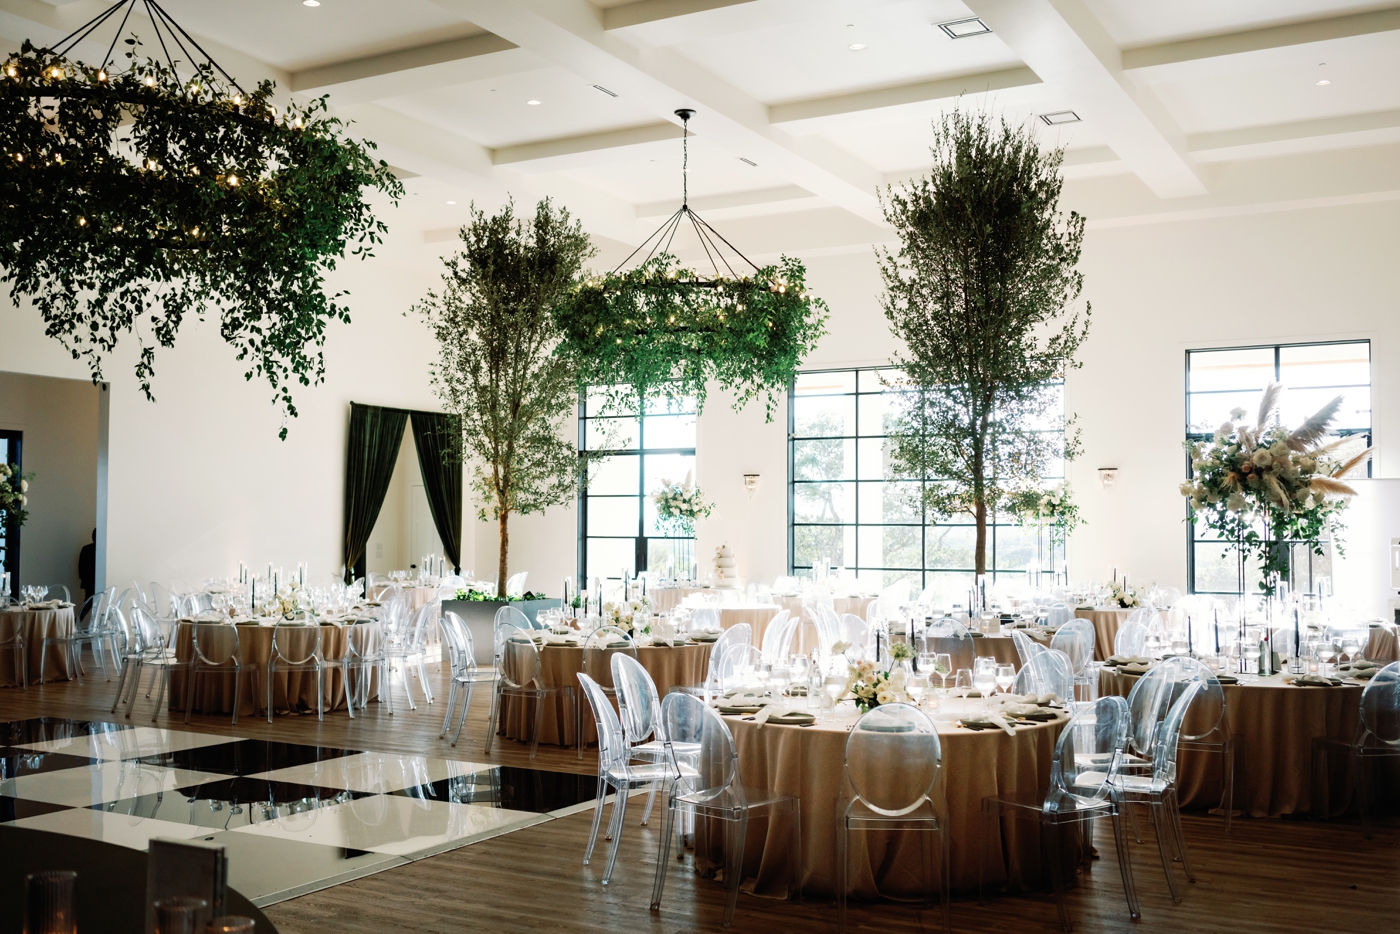 Indoor wedding reception with greenery chandeliers and trees